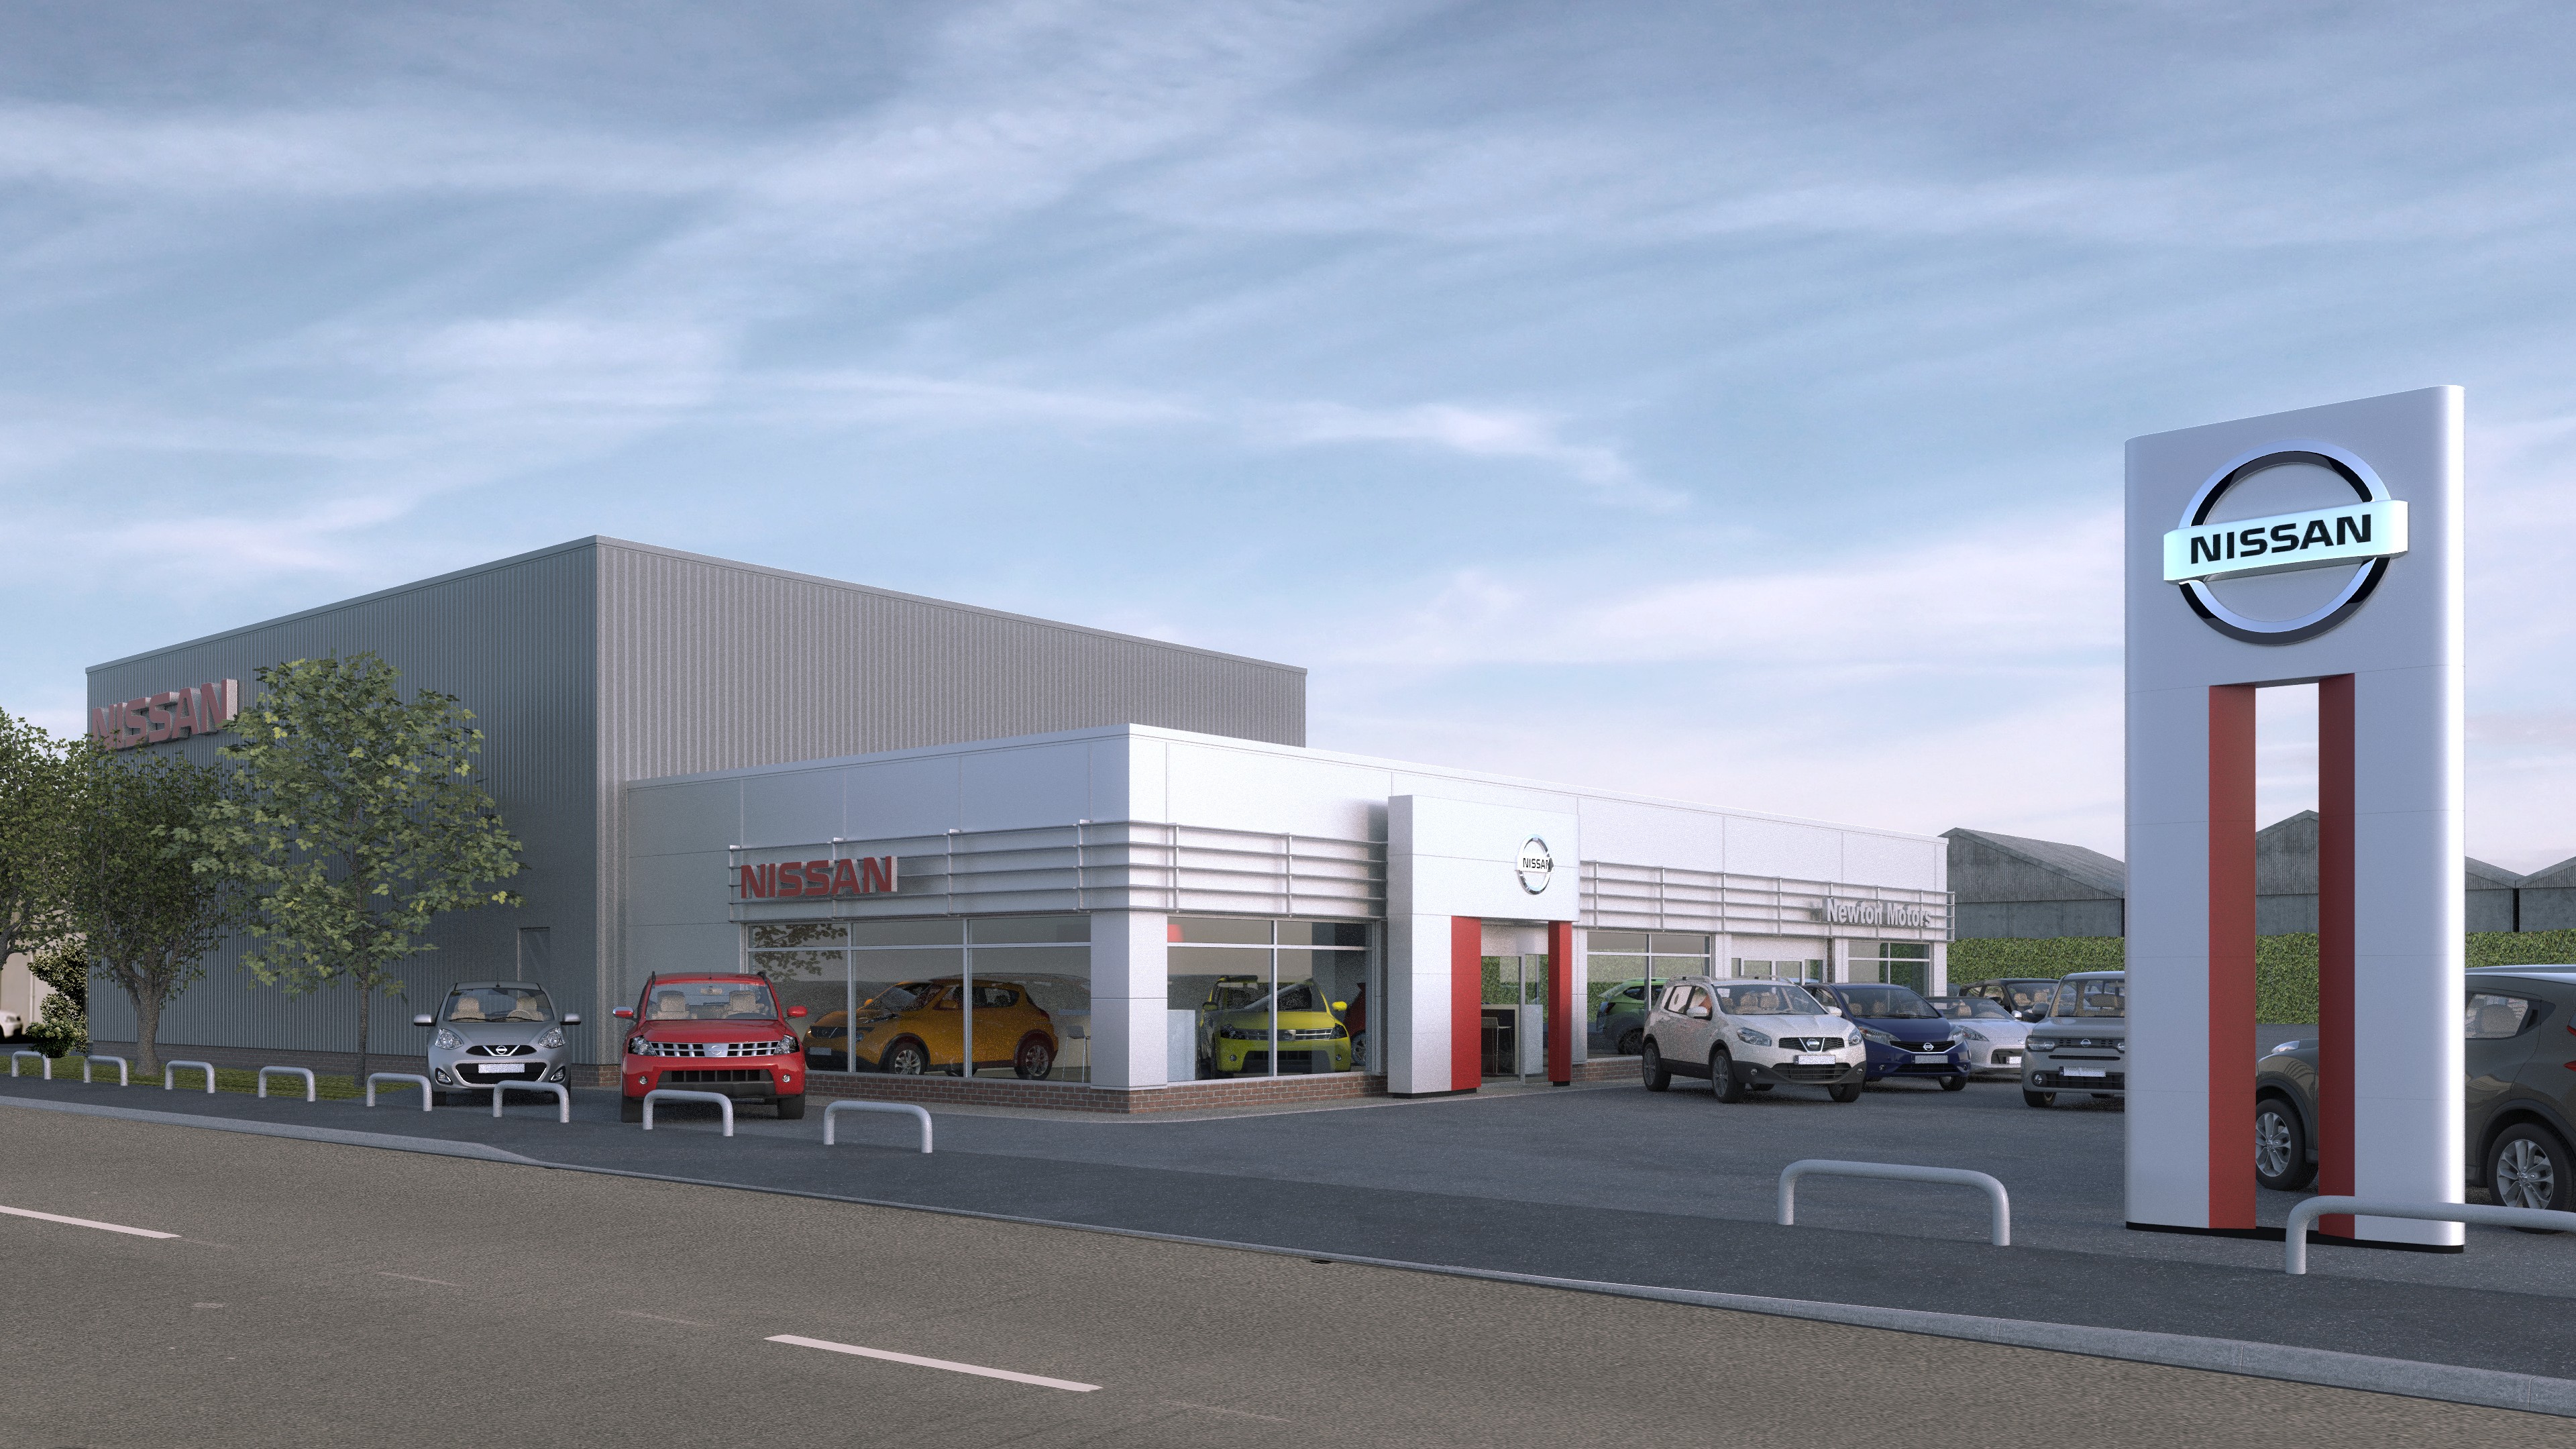 New Nissan dealership to launch in Hereford – Nissan Insider